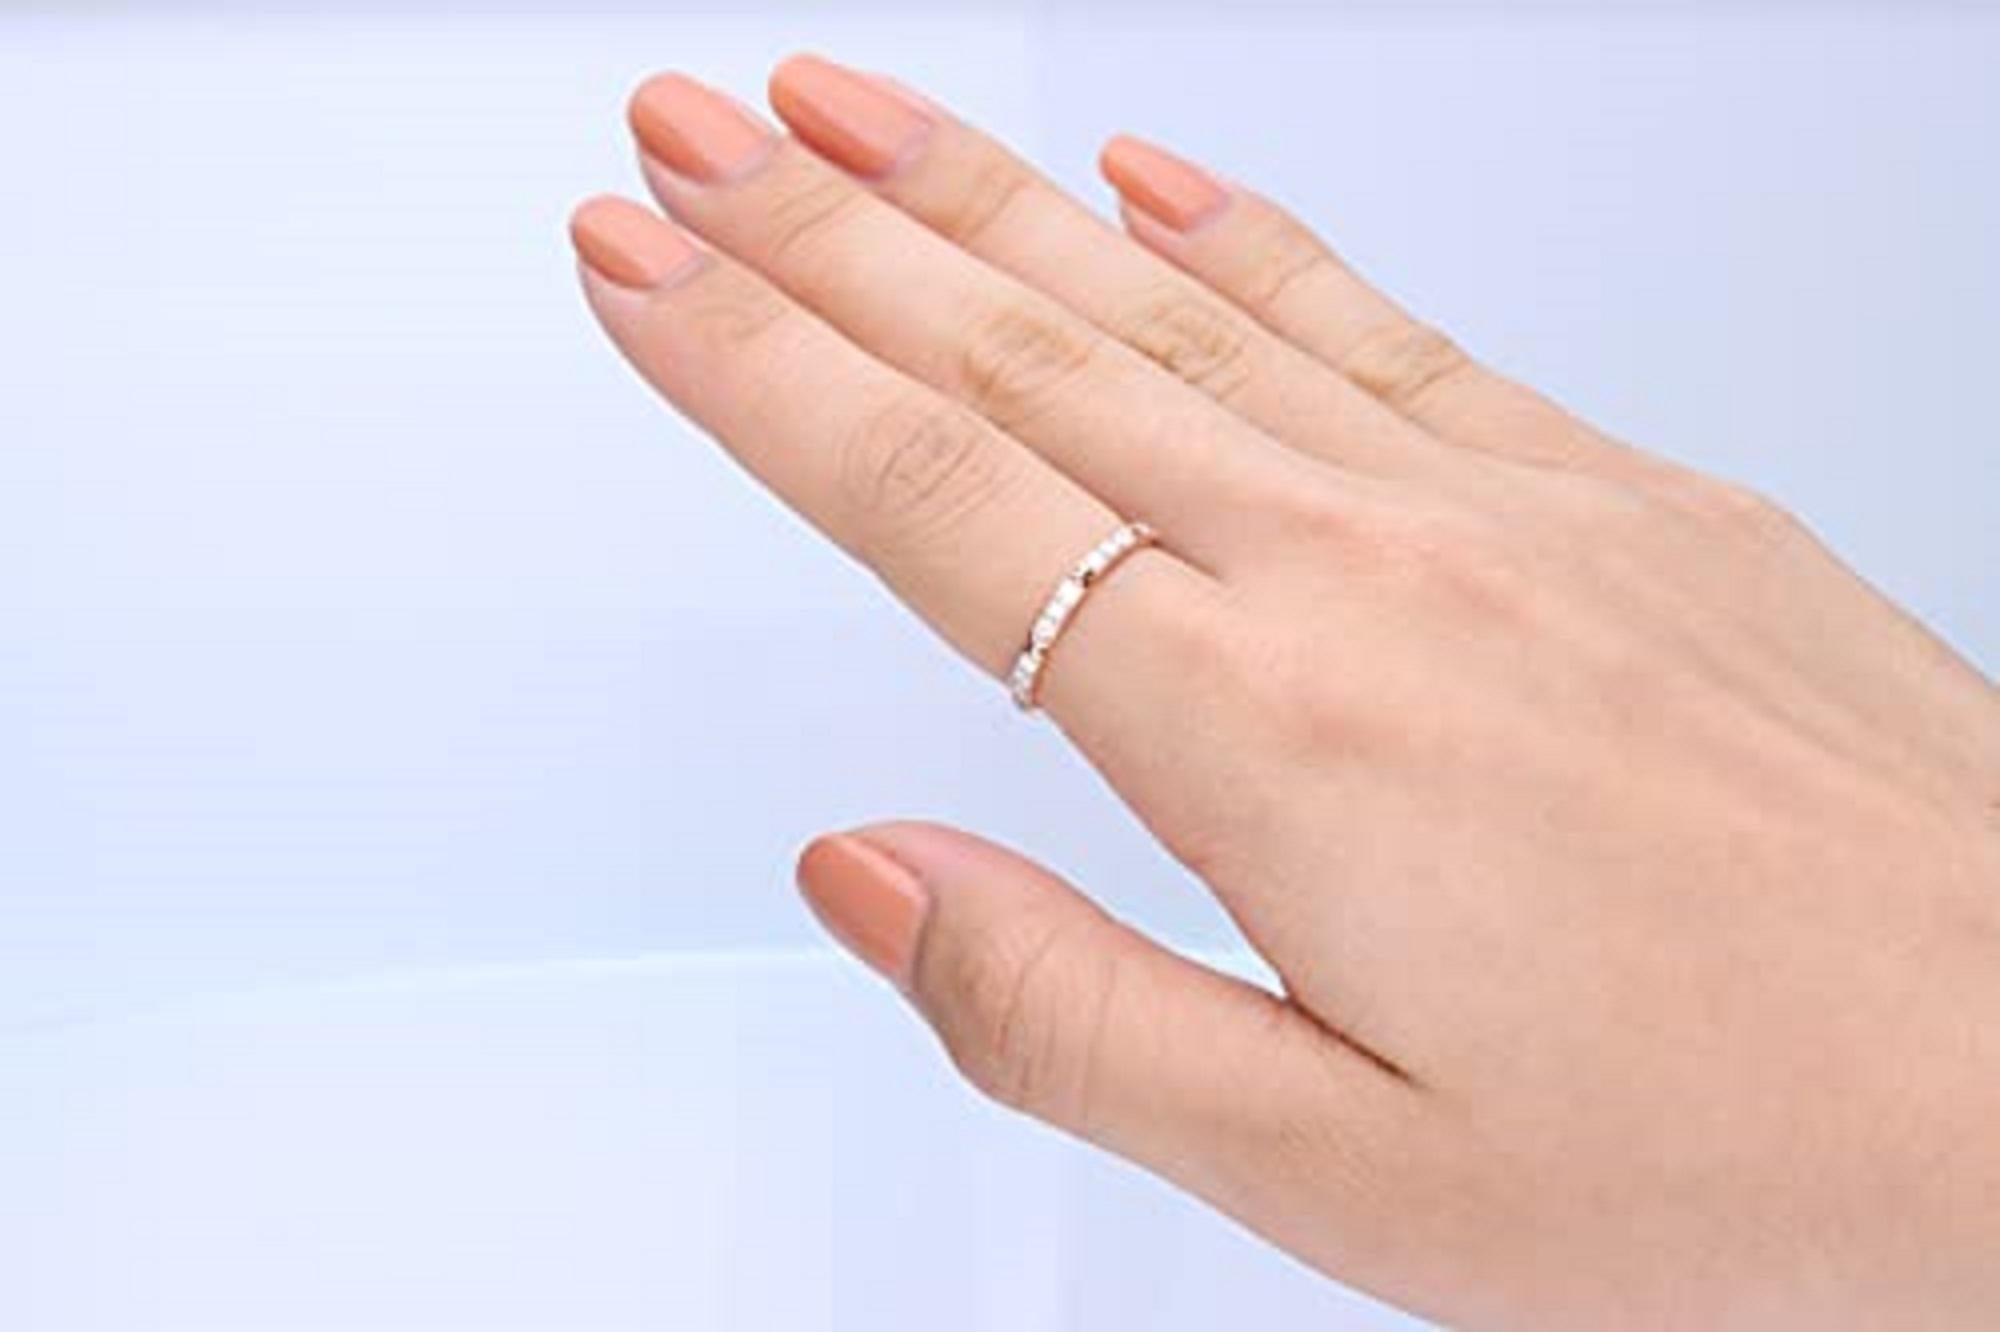 Decorate yourself in elegance with this Ring is crafted from 14-karat Rose Gold by Gin & Grace. This Ring is made up of Round-cut Prong-Setting White Diamond (15 Pcs) 0.33 Carat . This Ring is weight 1.73 grams. This delicate Ring is polished to a